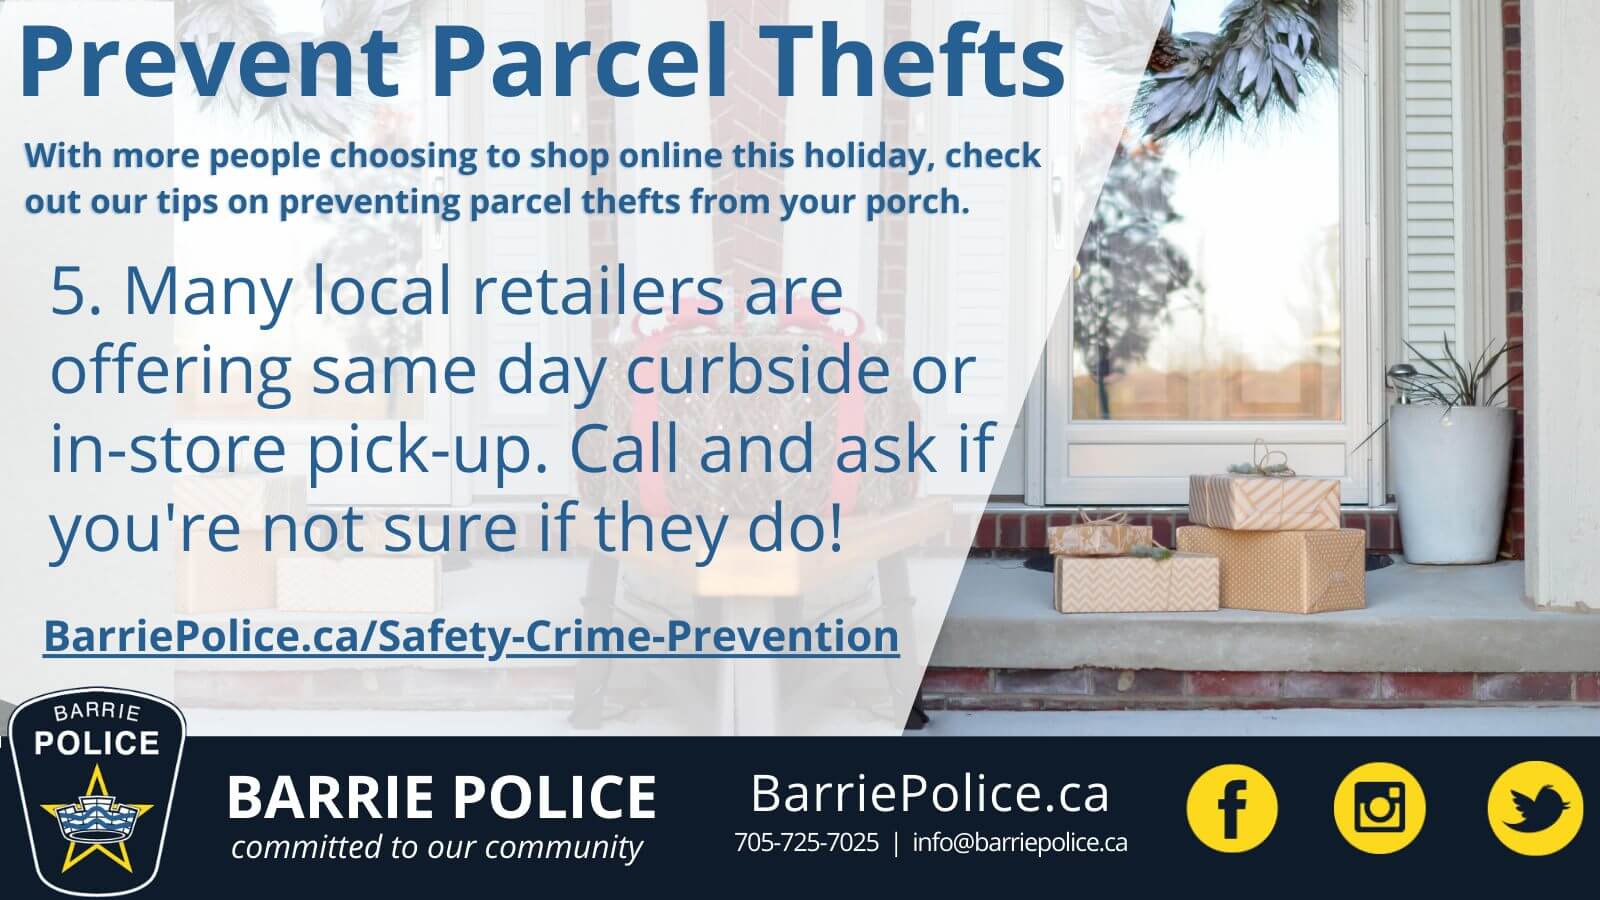 Prevent Parcel Thefts Tip 5: Call and ask if local retailers are doing curb-side pick up